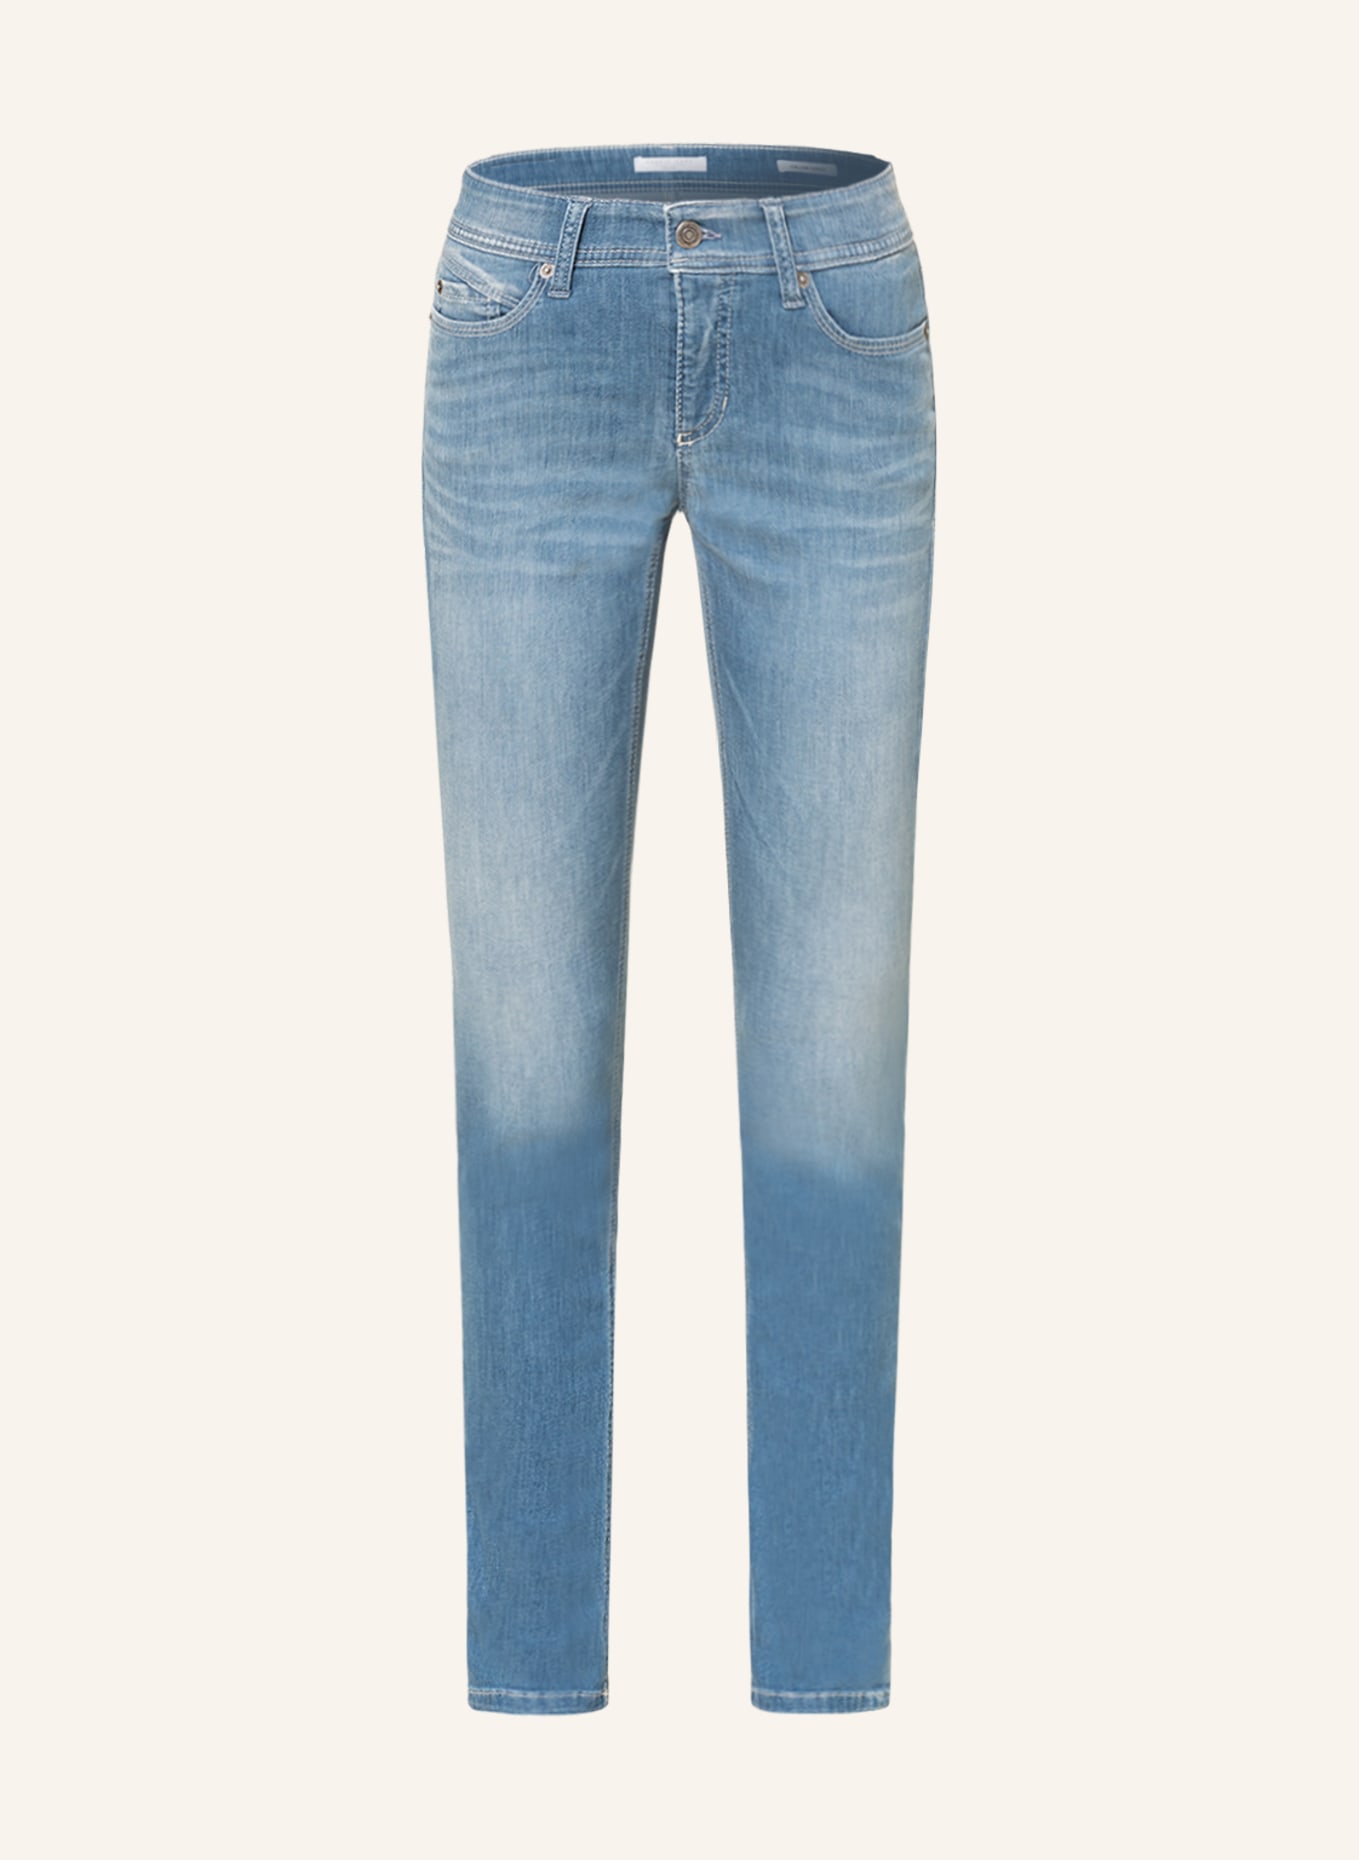 CAMBIO Jeans PARLA, Color: 5222 medium 3D used (Image 1)